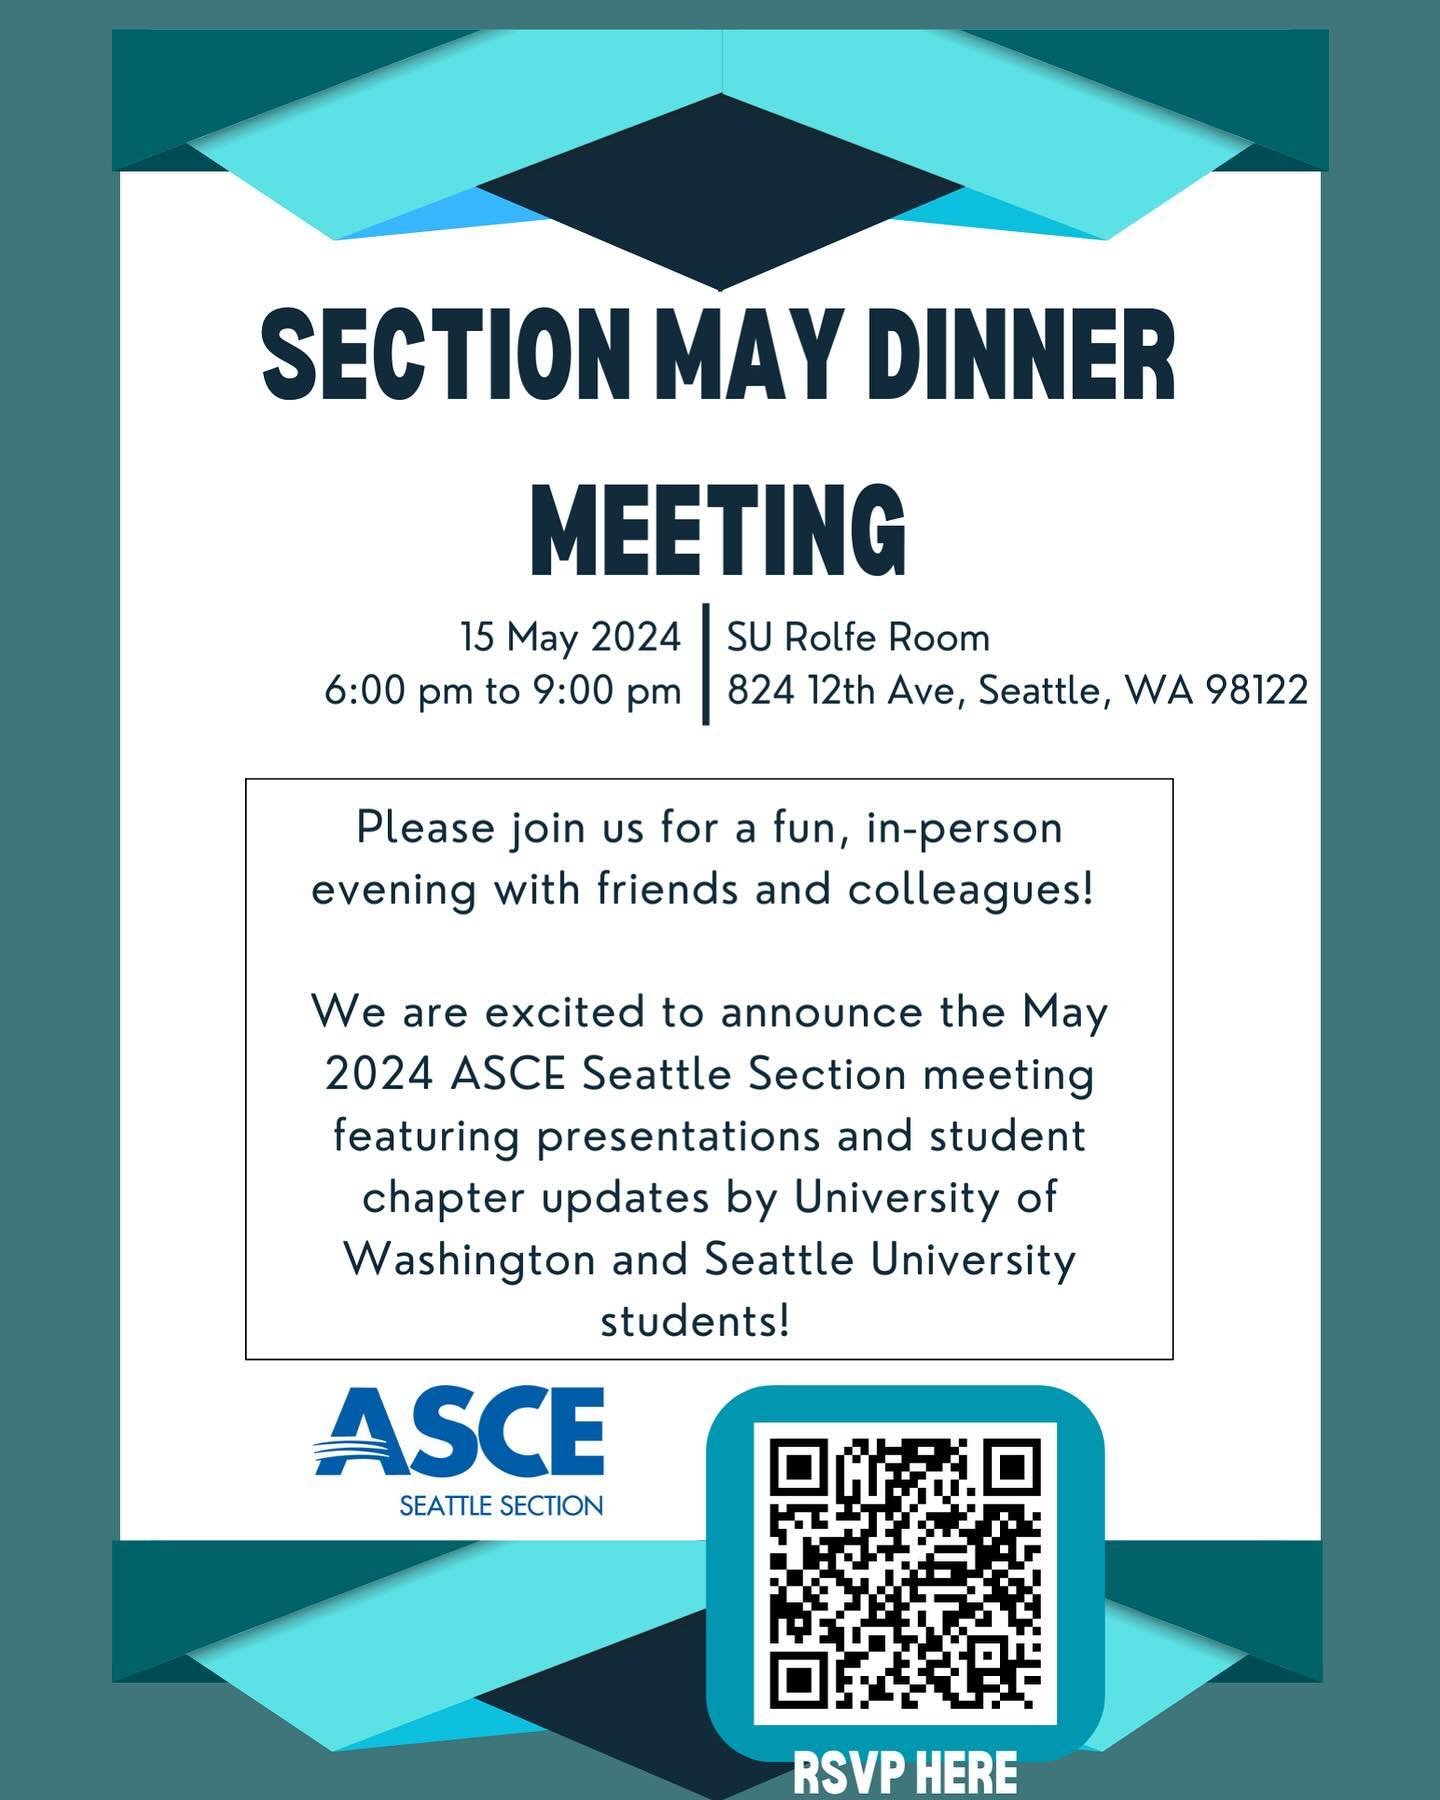 Please join us next Wednesday for the Seattle Section May Dinner Meeting! We will be at SU watching student presentations and hearing student chapter updates. Low cost for all attendees! Sign up now!